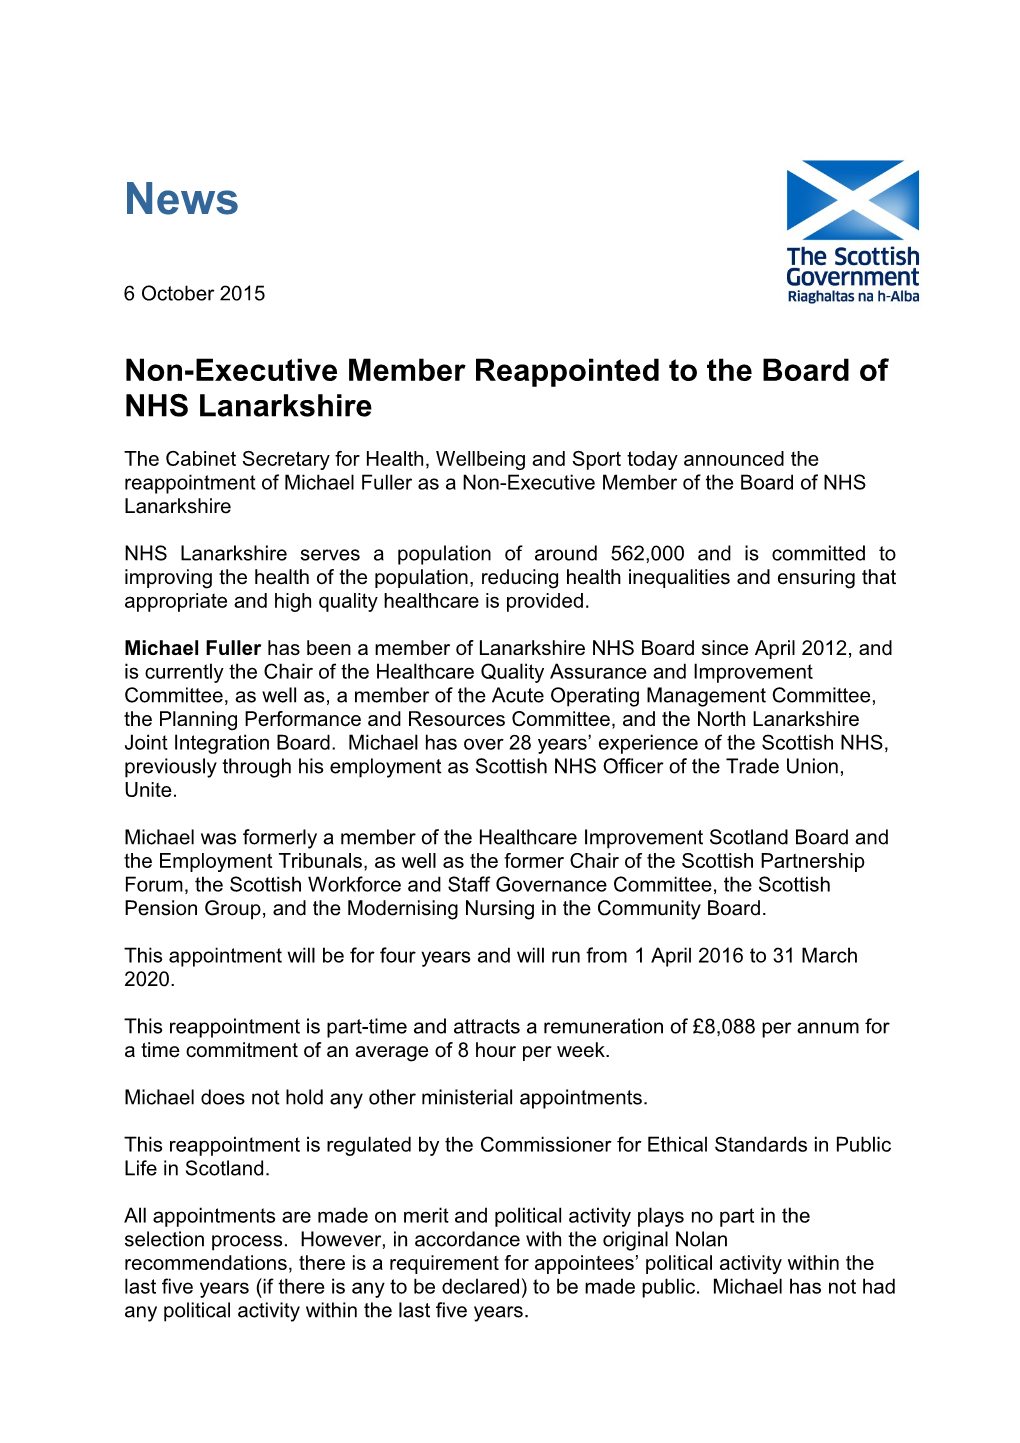 Non-Executive Member Reappointed to the Board of NHS Lanarkshire